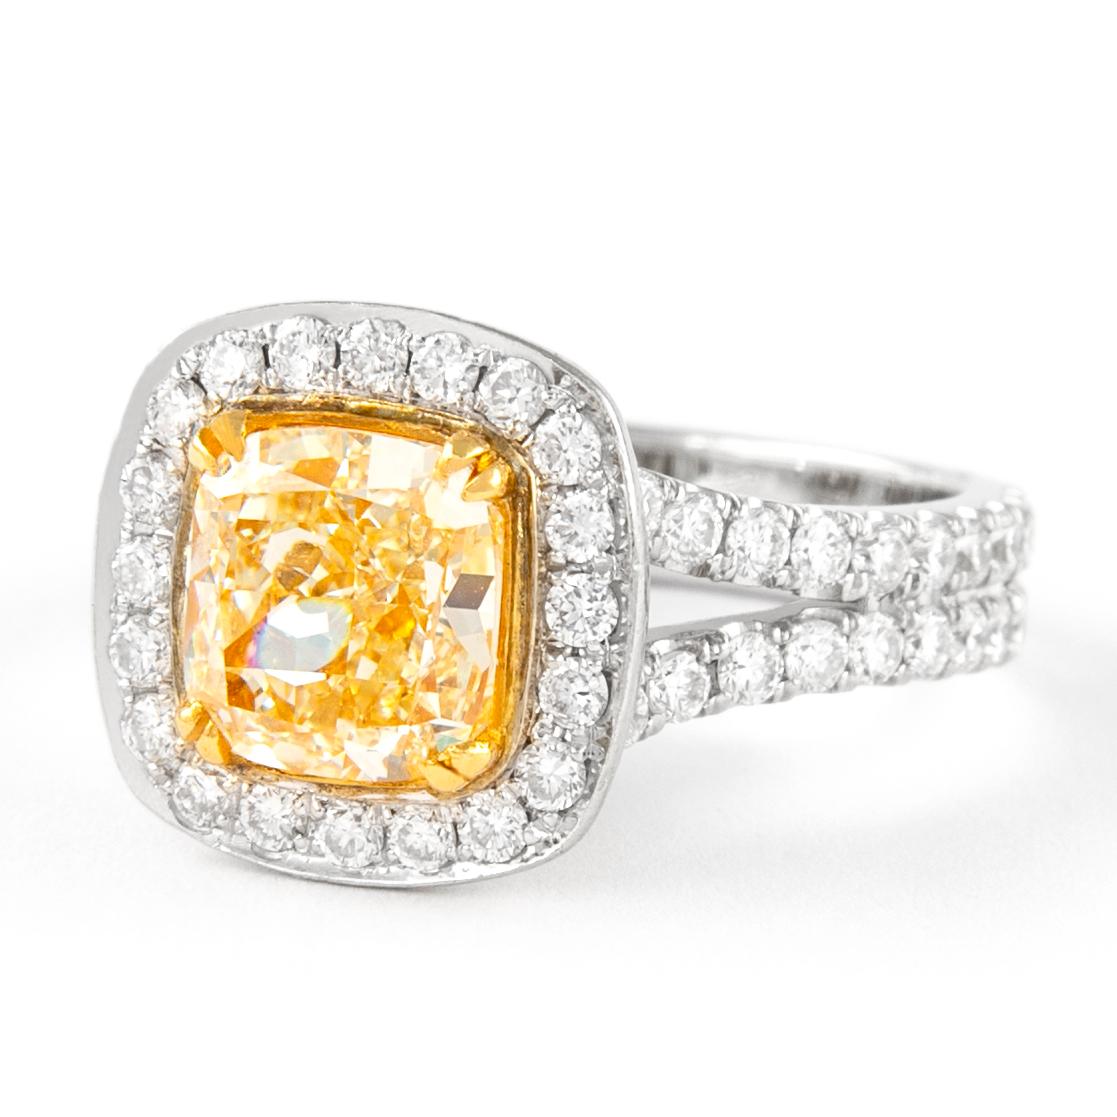 Contemporary Alexander 2.11ct Fancy Intense Yellow VS1 Cushion Diamond with Halo Ring 18k For Sale